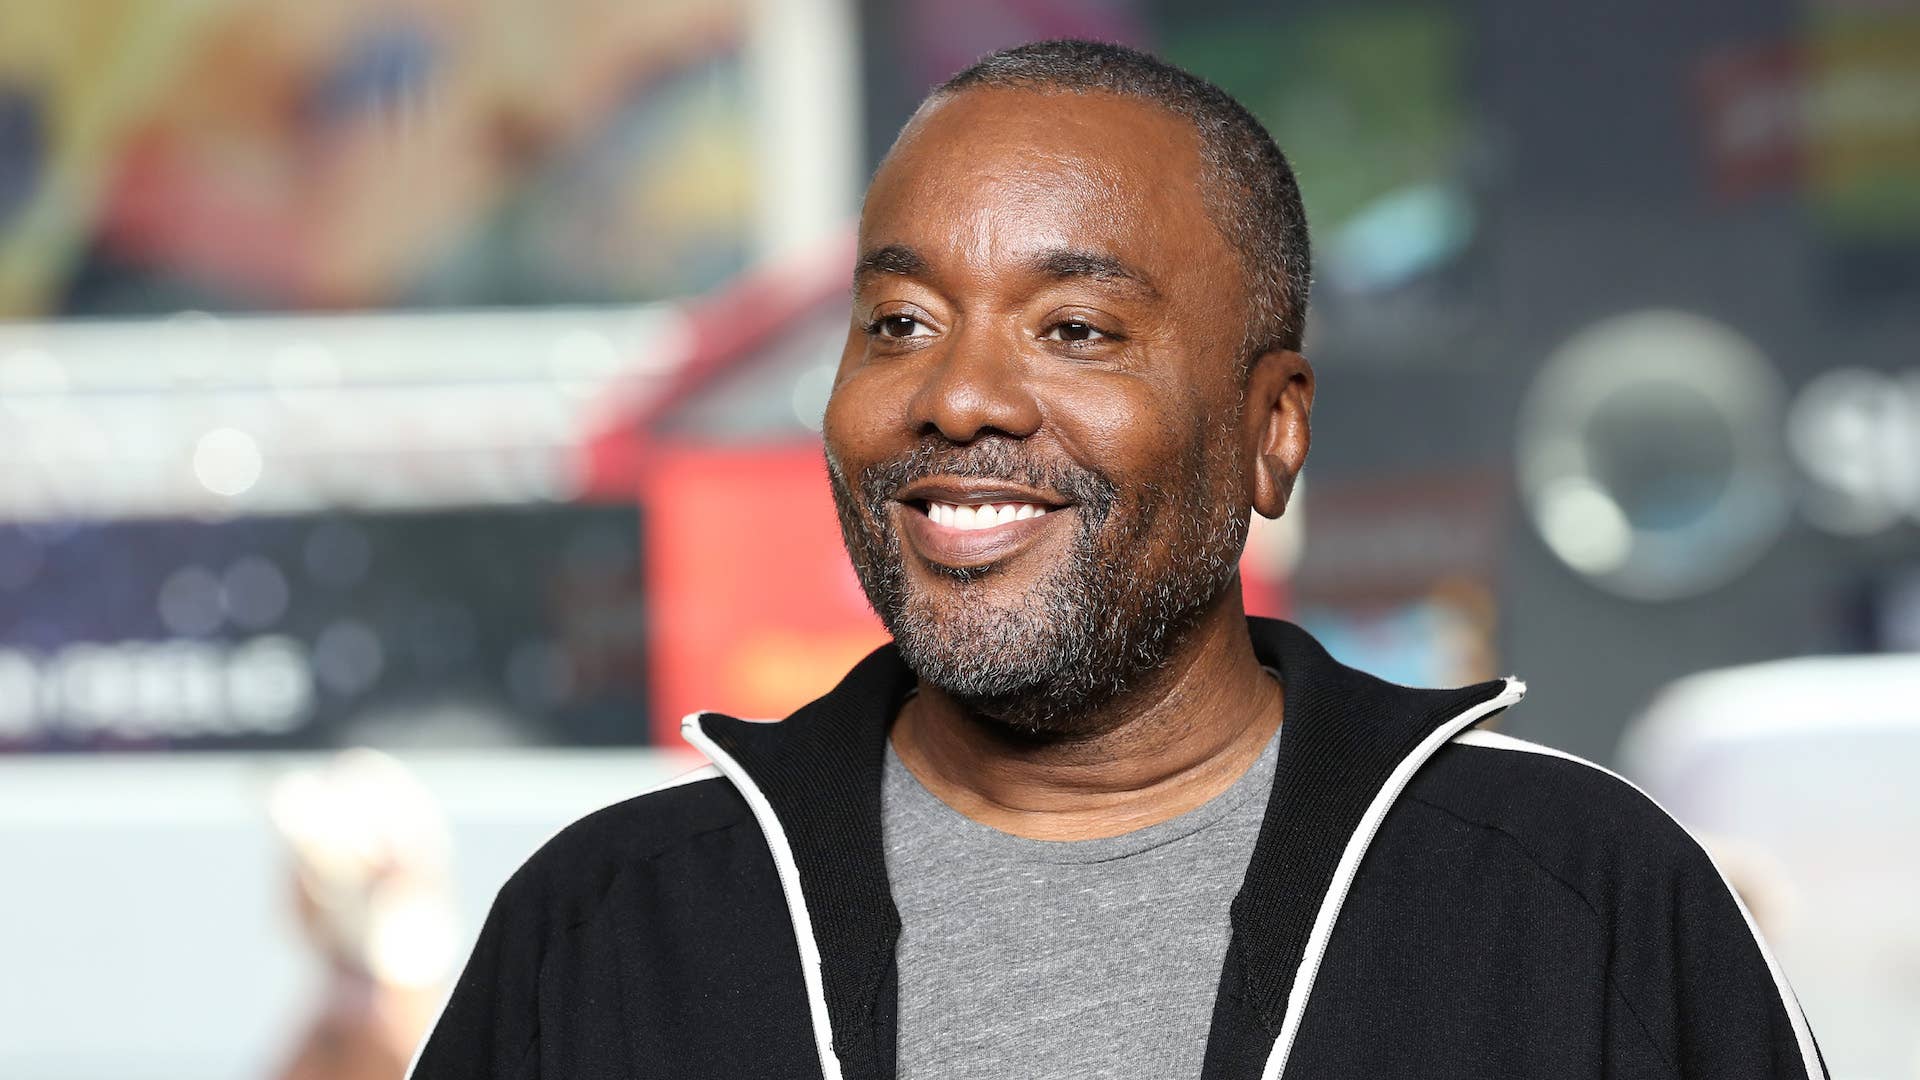 Writer, director and producer Lee Daniels